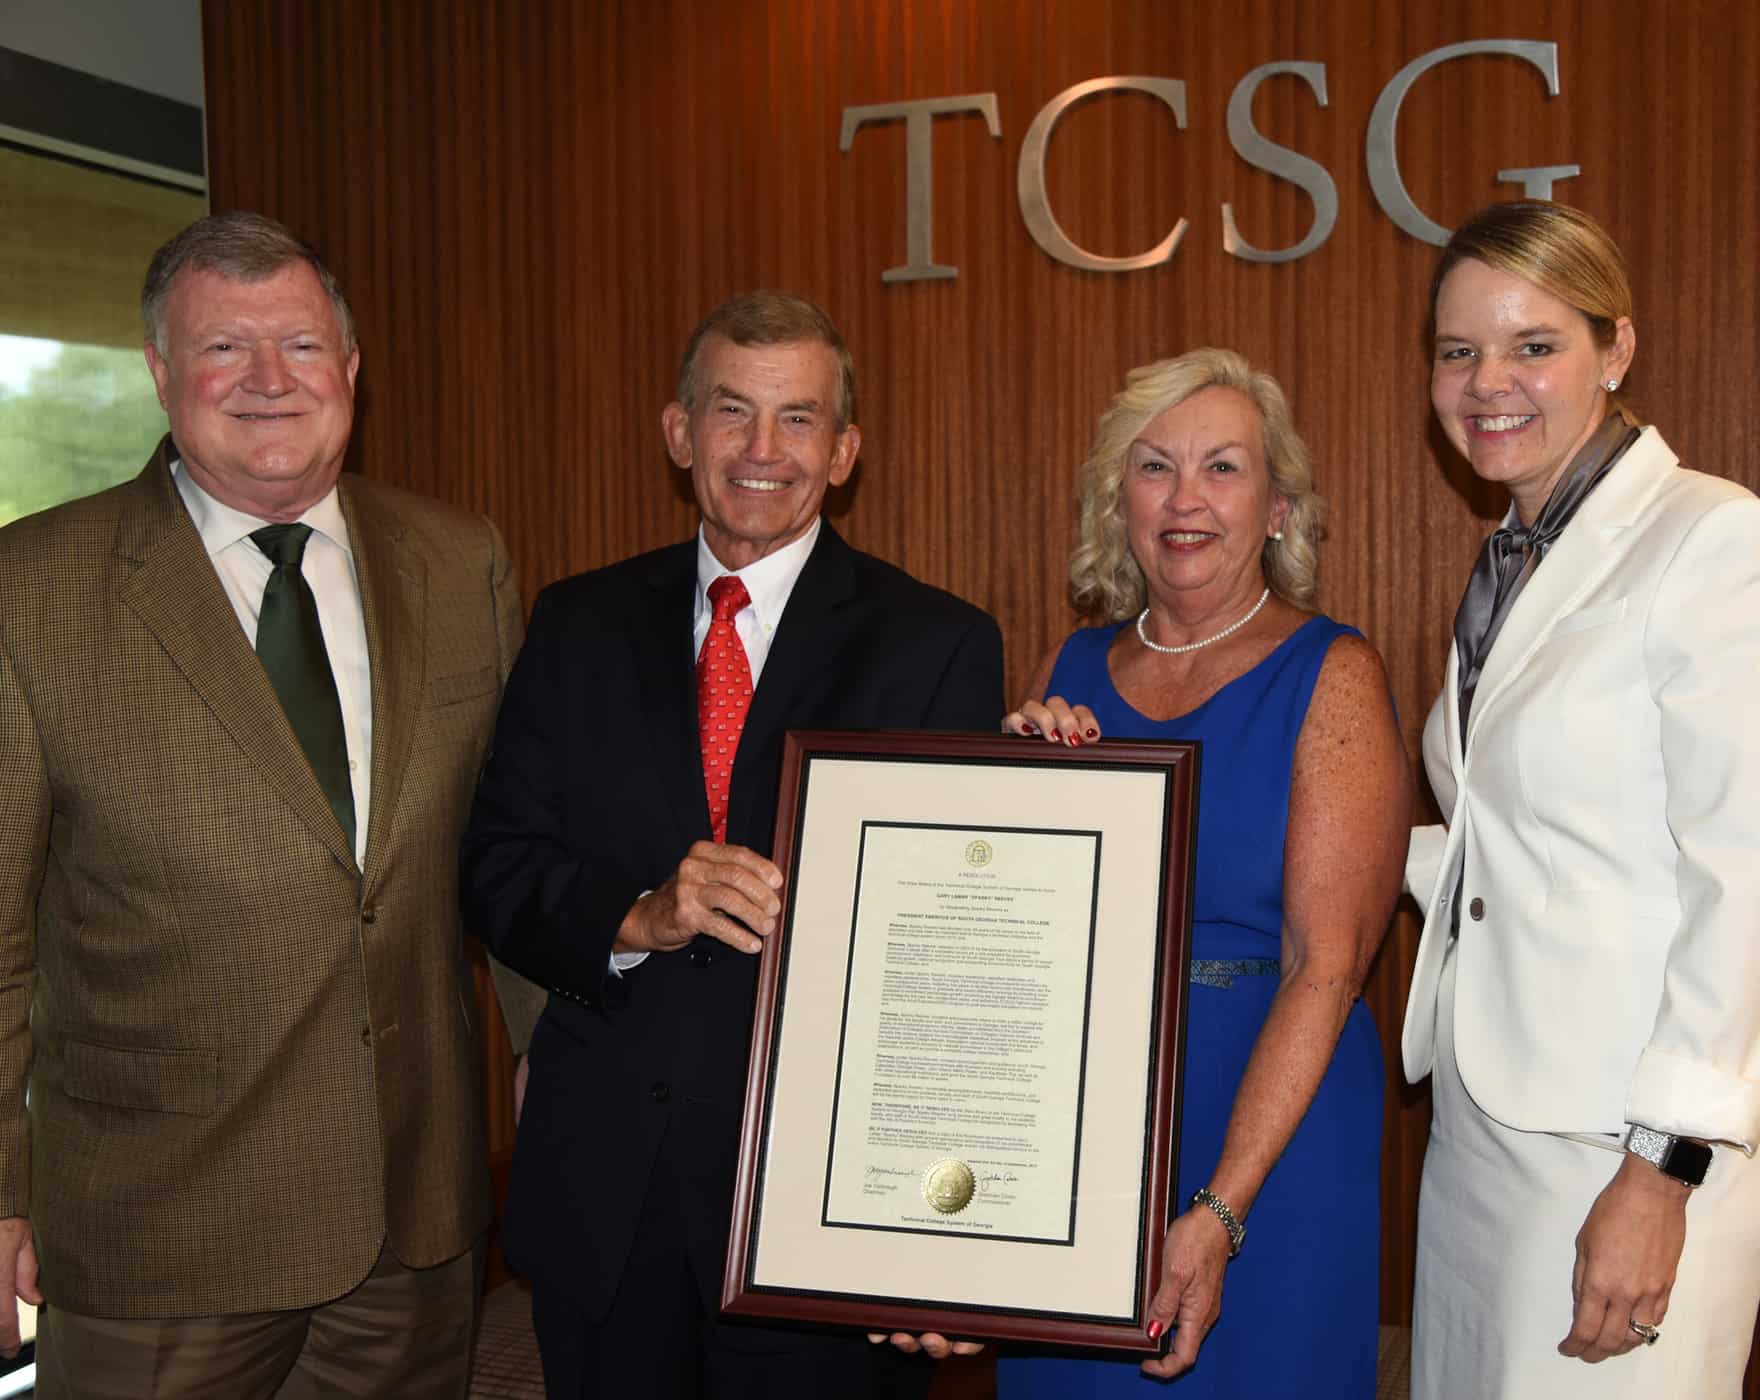 President Sparky Reeves and Allene Reeves accept a plaque from the TCSG Commissioner.